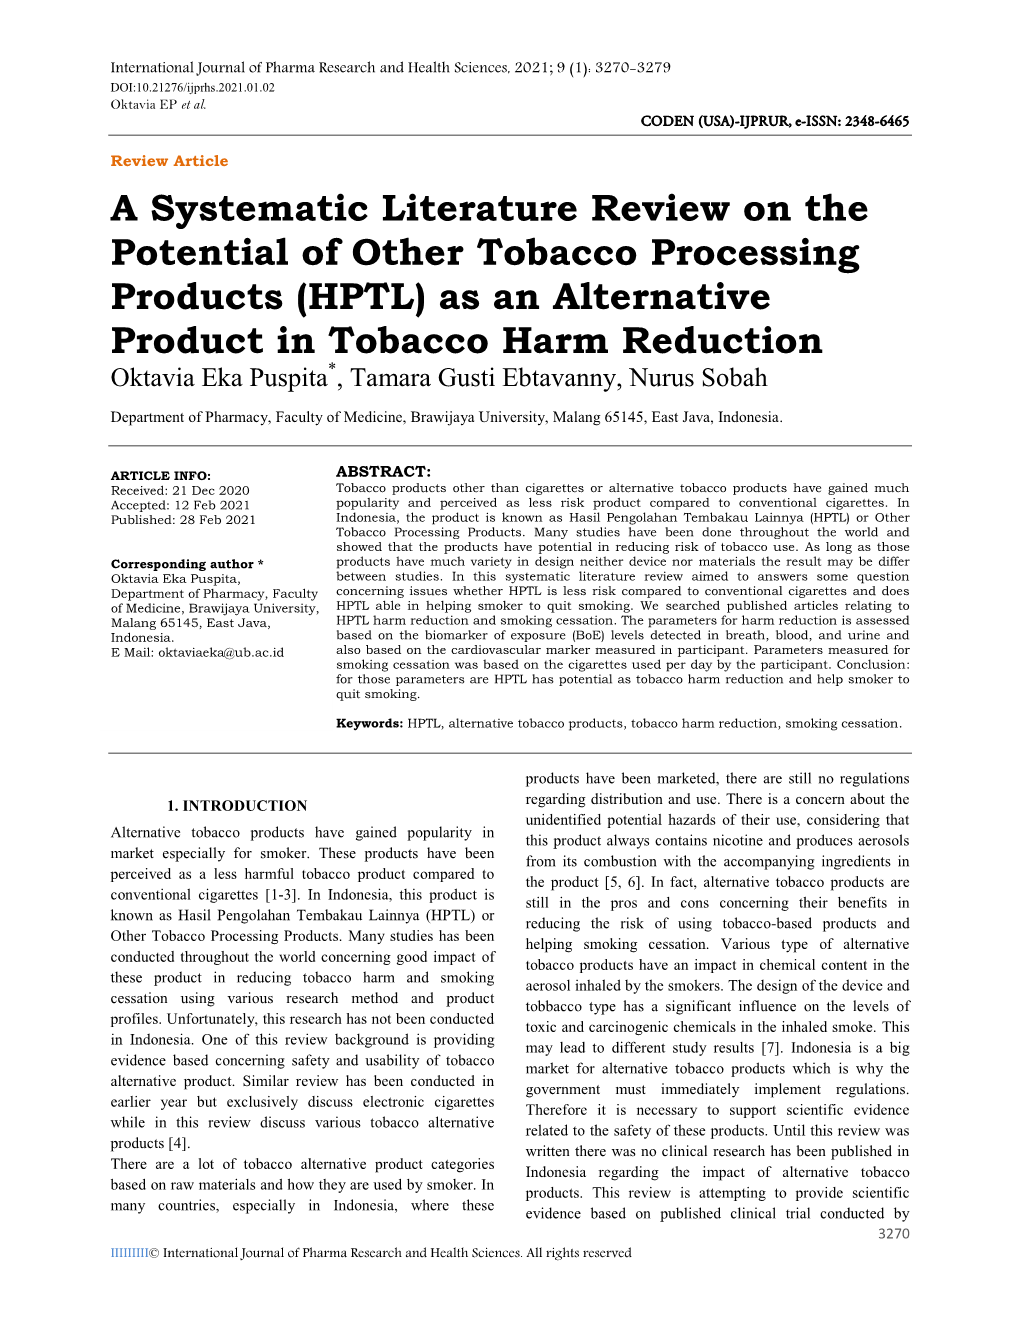 A Systematic Literature Review on the Potential of Other Tobacco